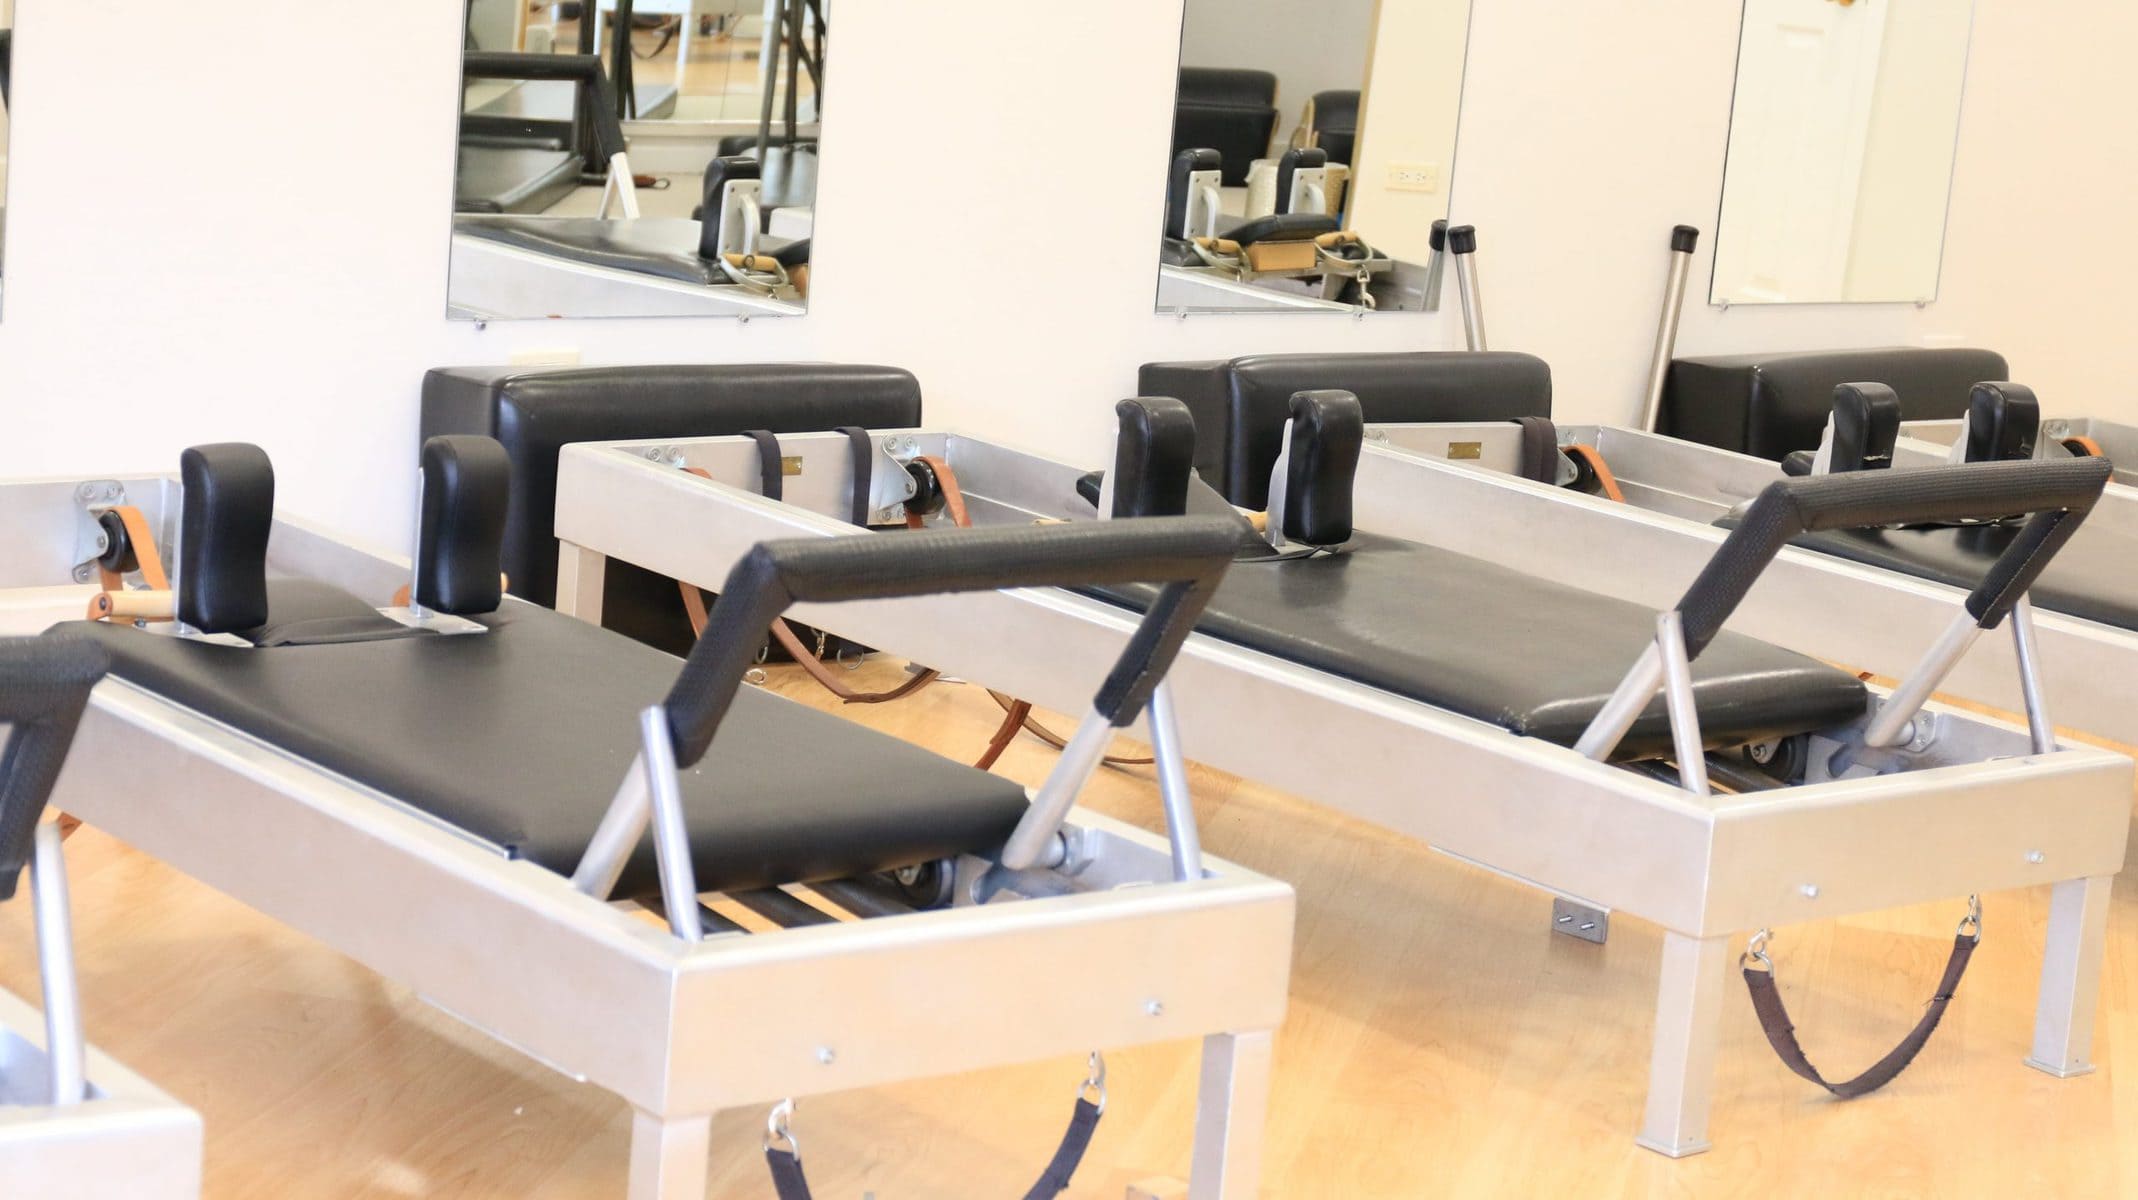 Rates - Scarsdale Pilates